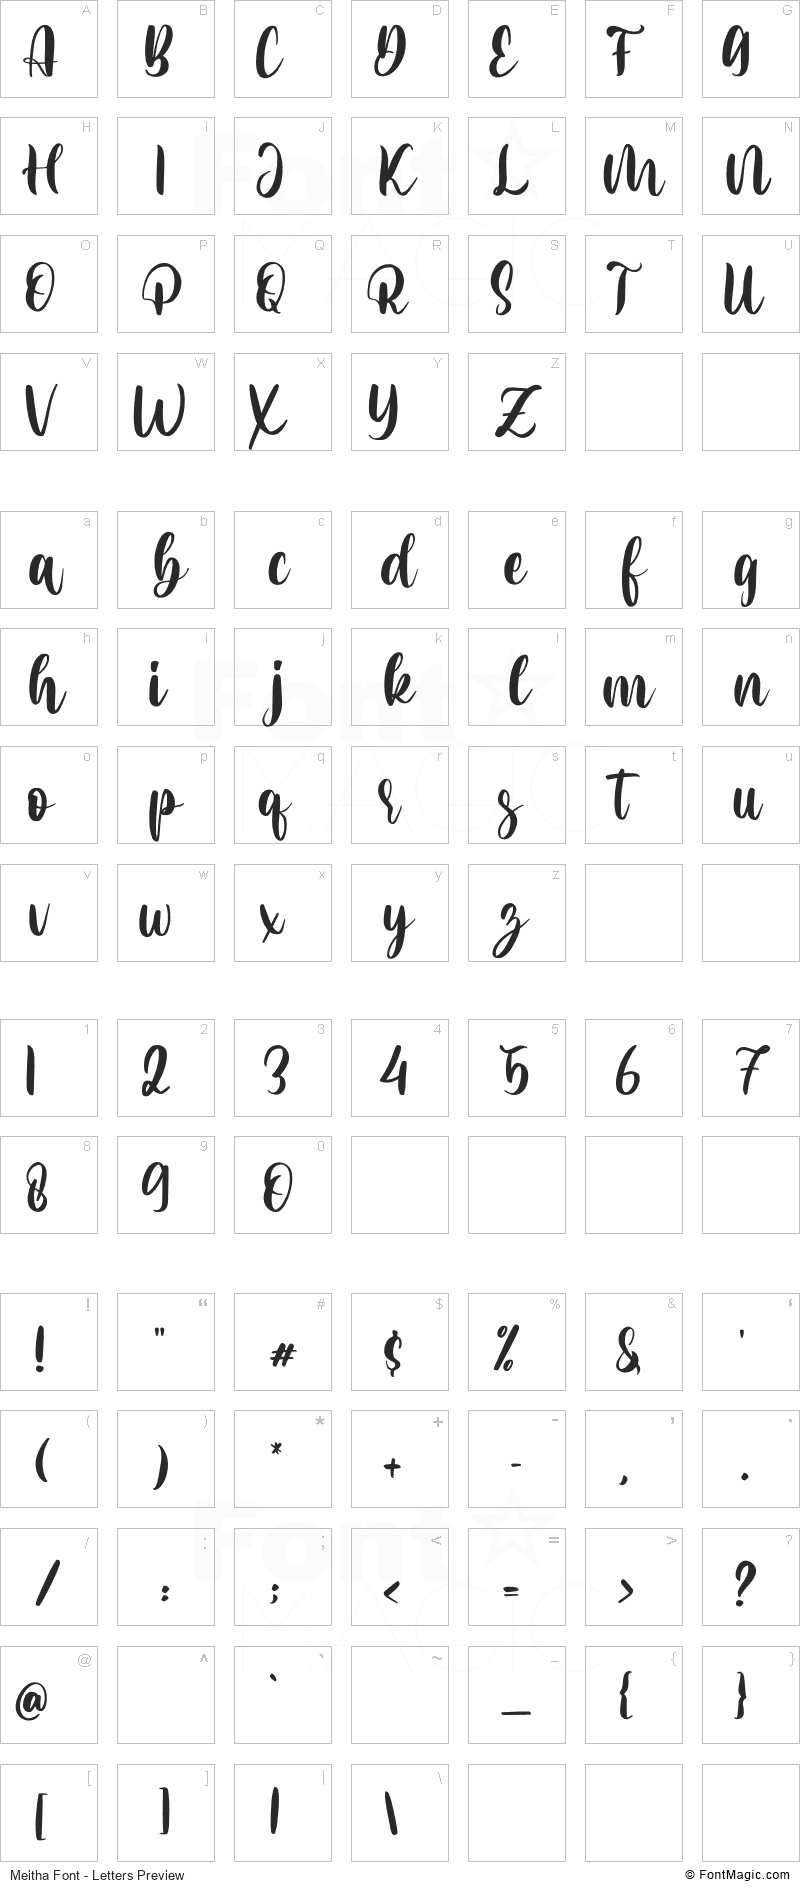 Meitha Font - All Latters Preview Chart